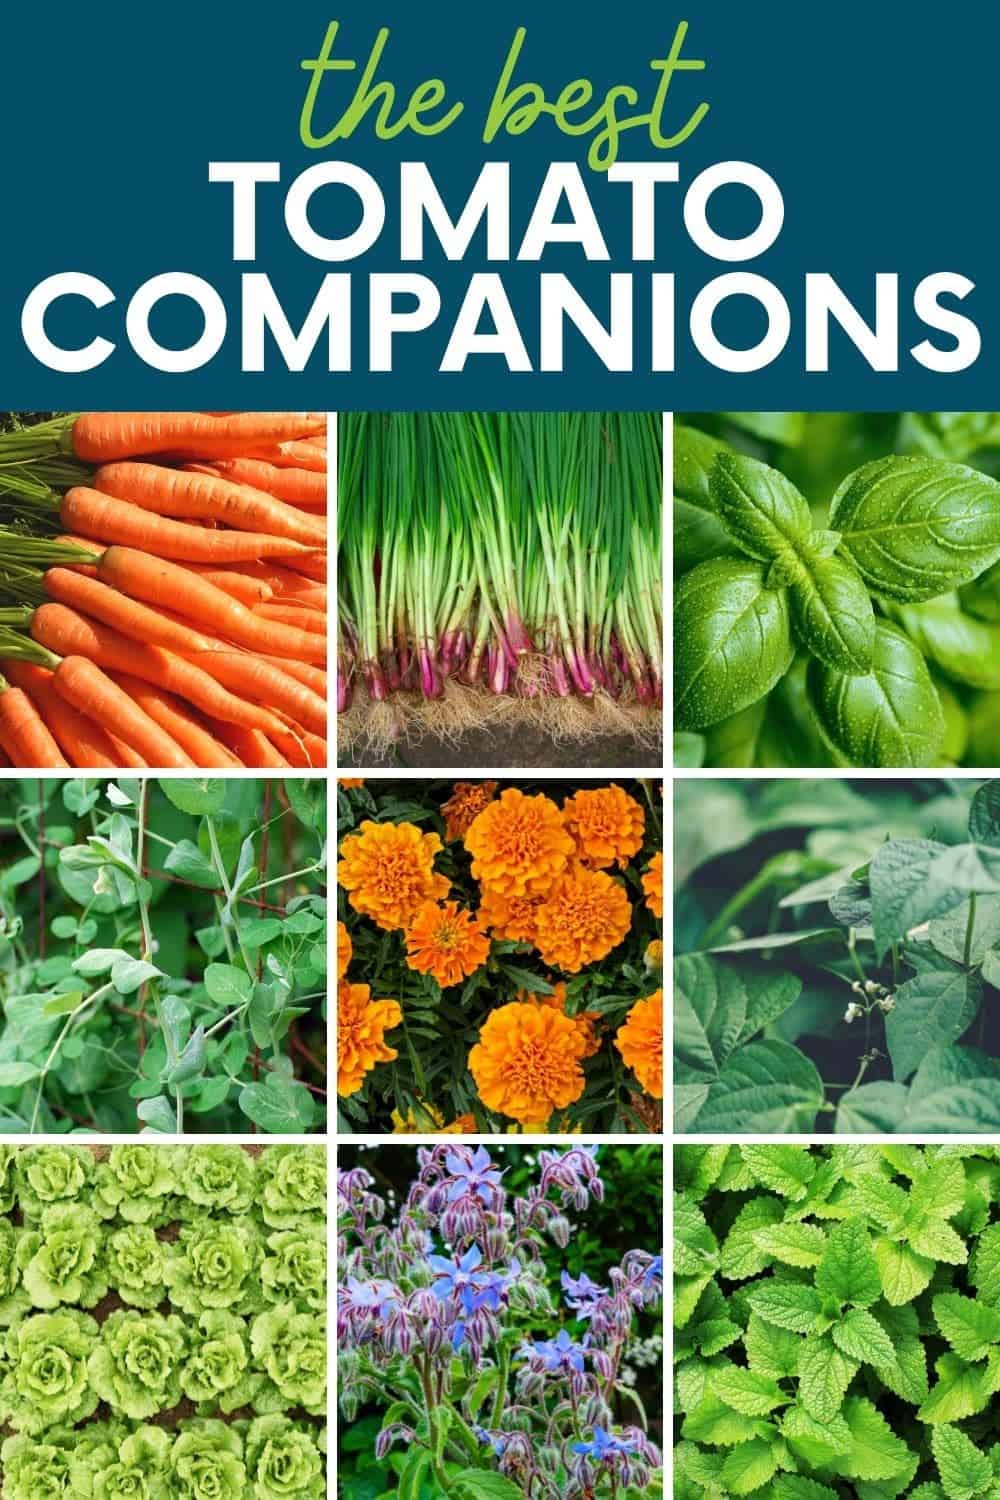 17 Evidence-Based Companion Plants for Tomatoes - Growfully